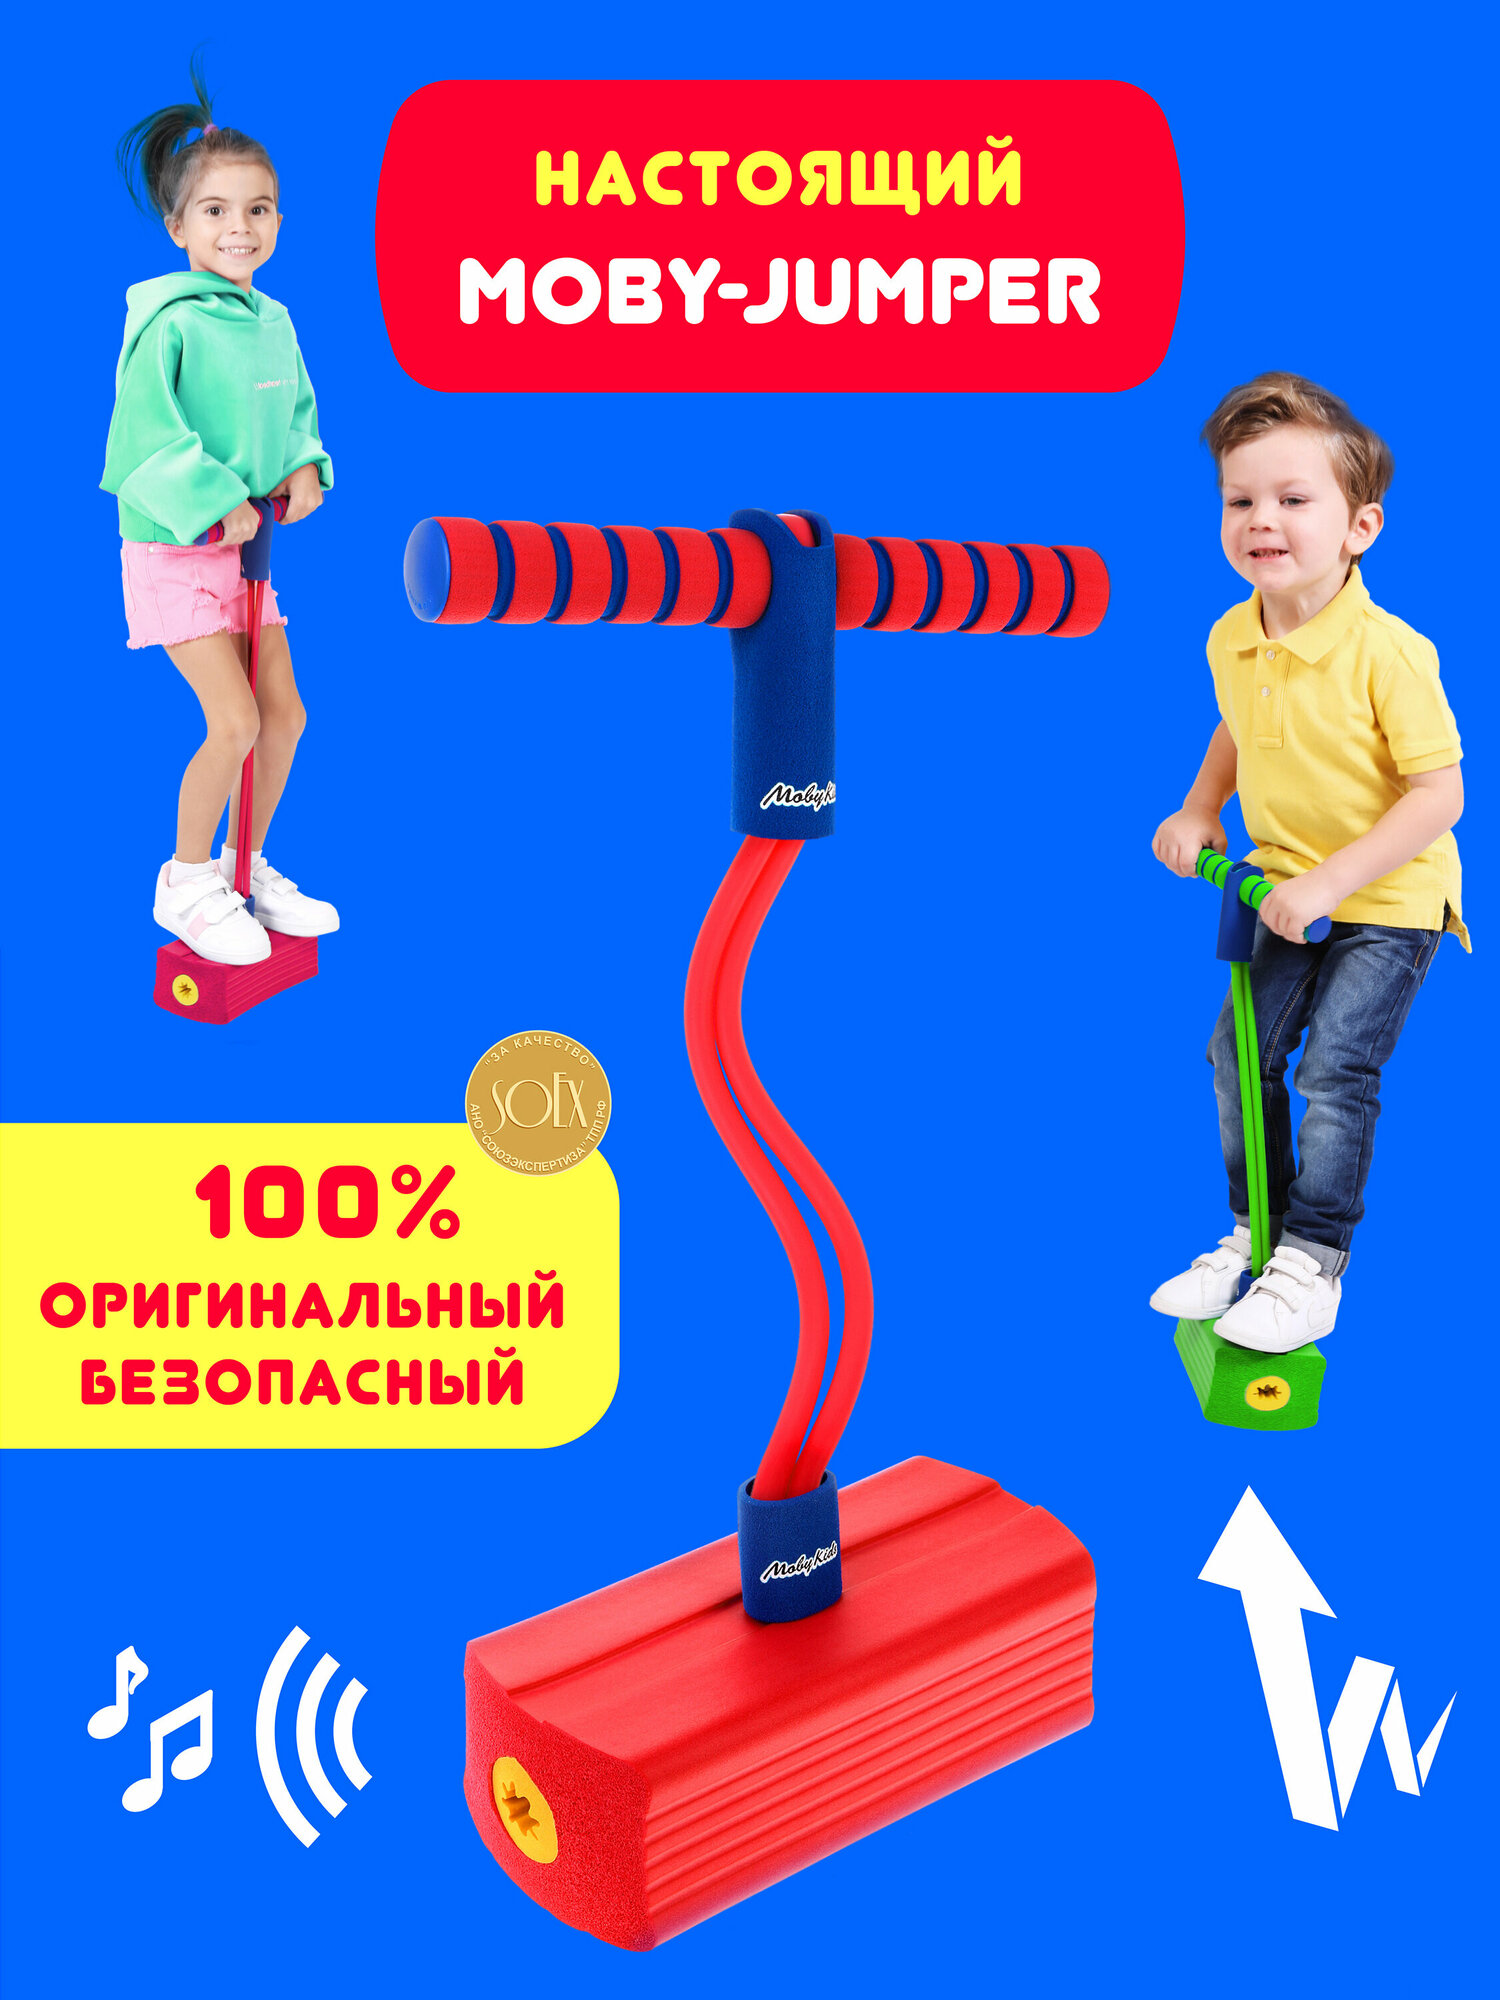      MobyJumper, 